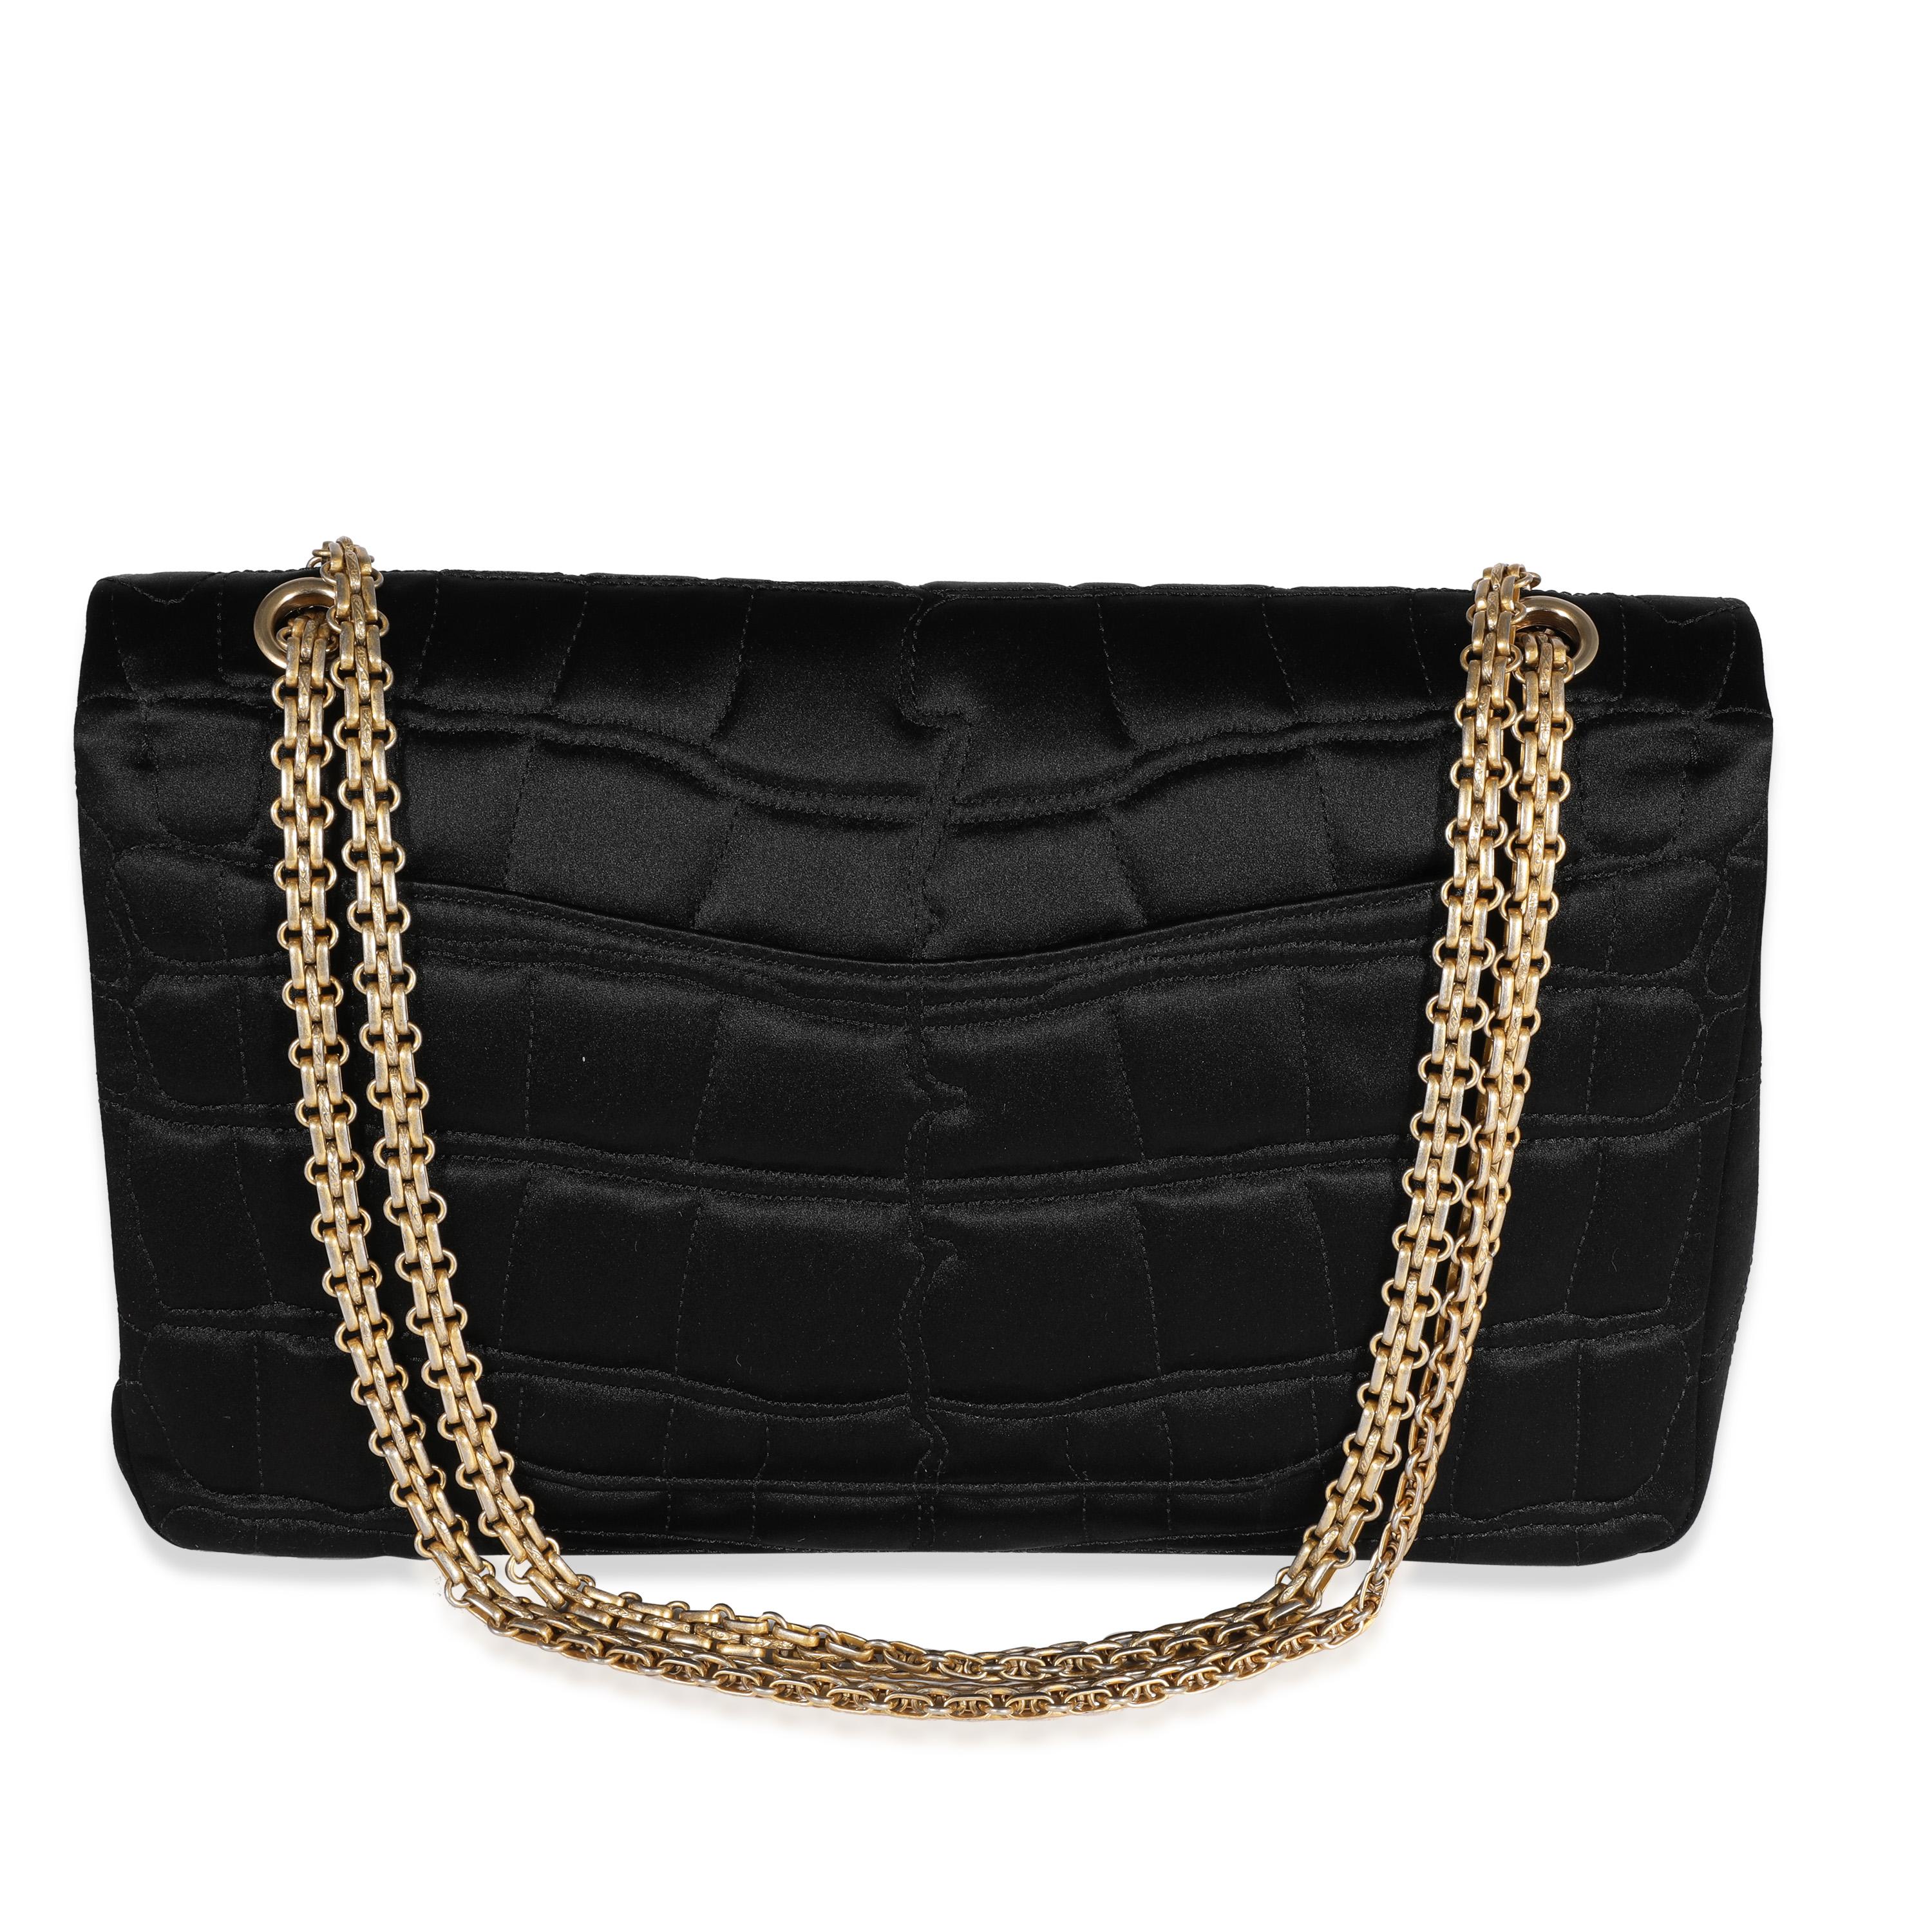 Chanel Black Crocodile Stitch Satin Reissue 2.55 227 Double Flap Bag In Good Condition For Sale In New York, NY